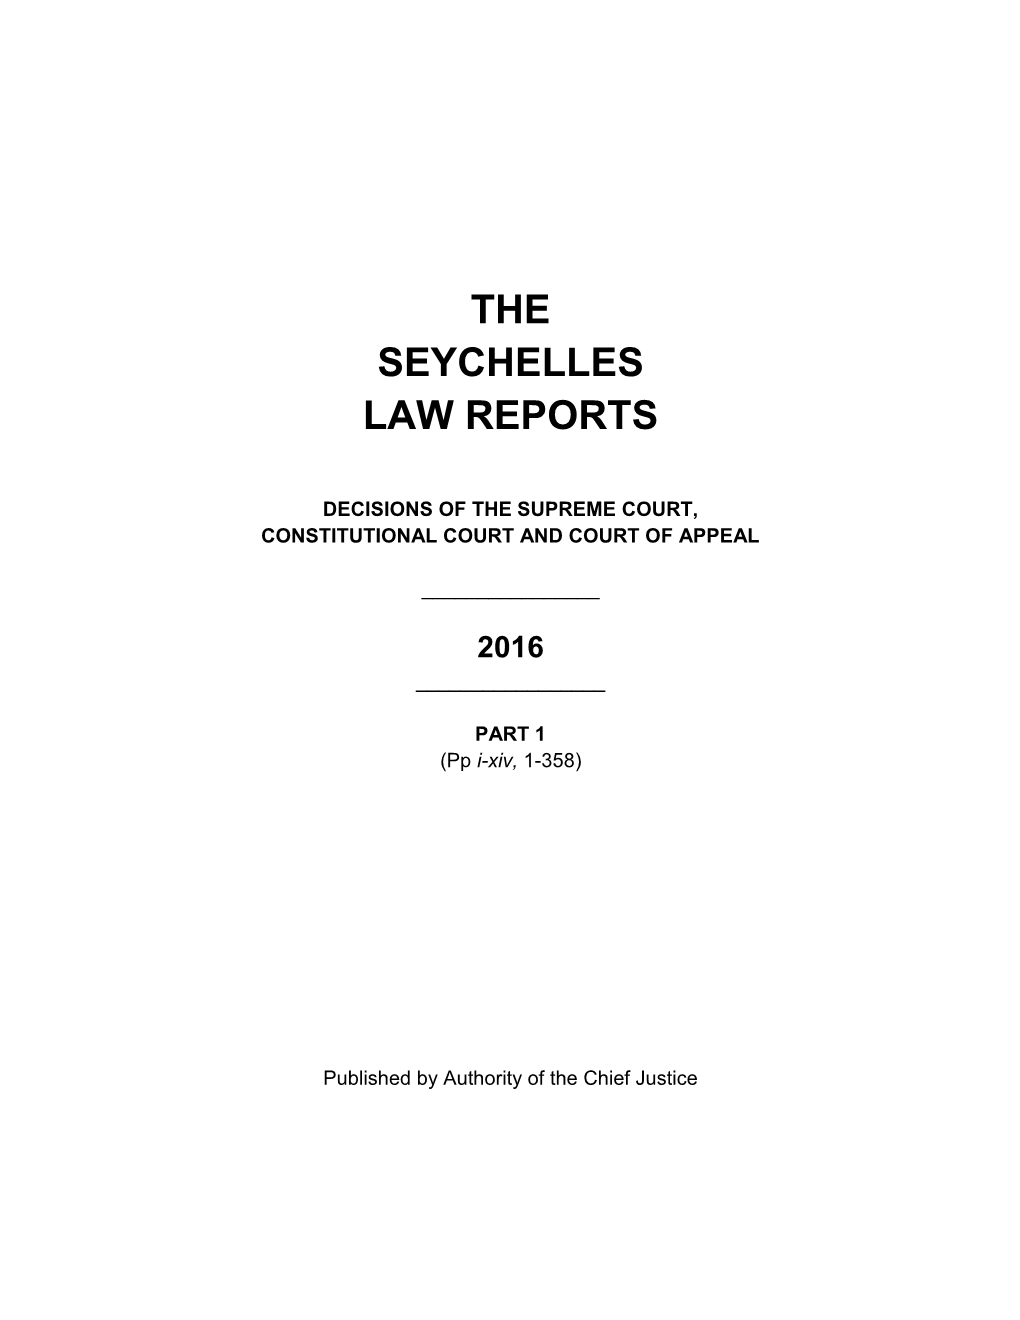 The Seychelles Law Reports